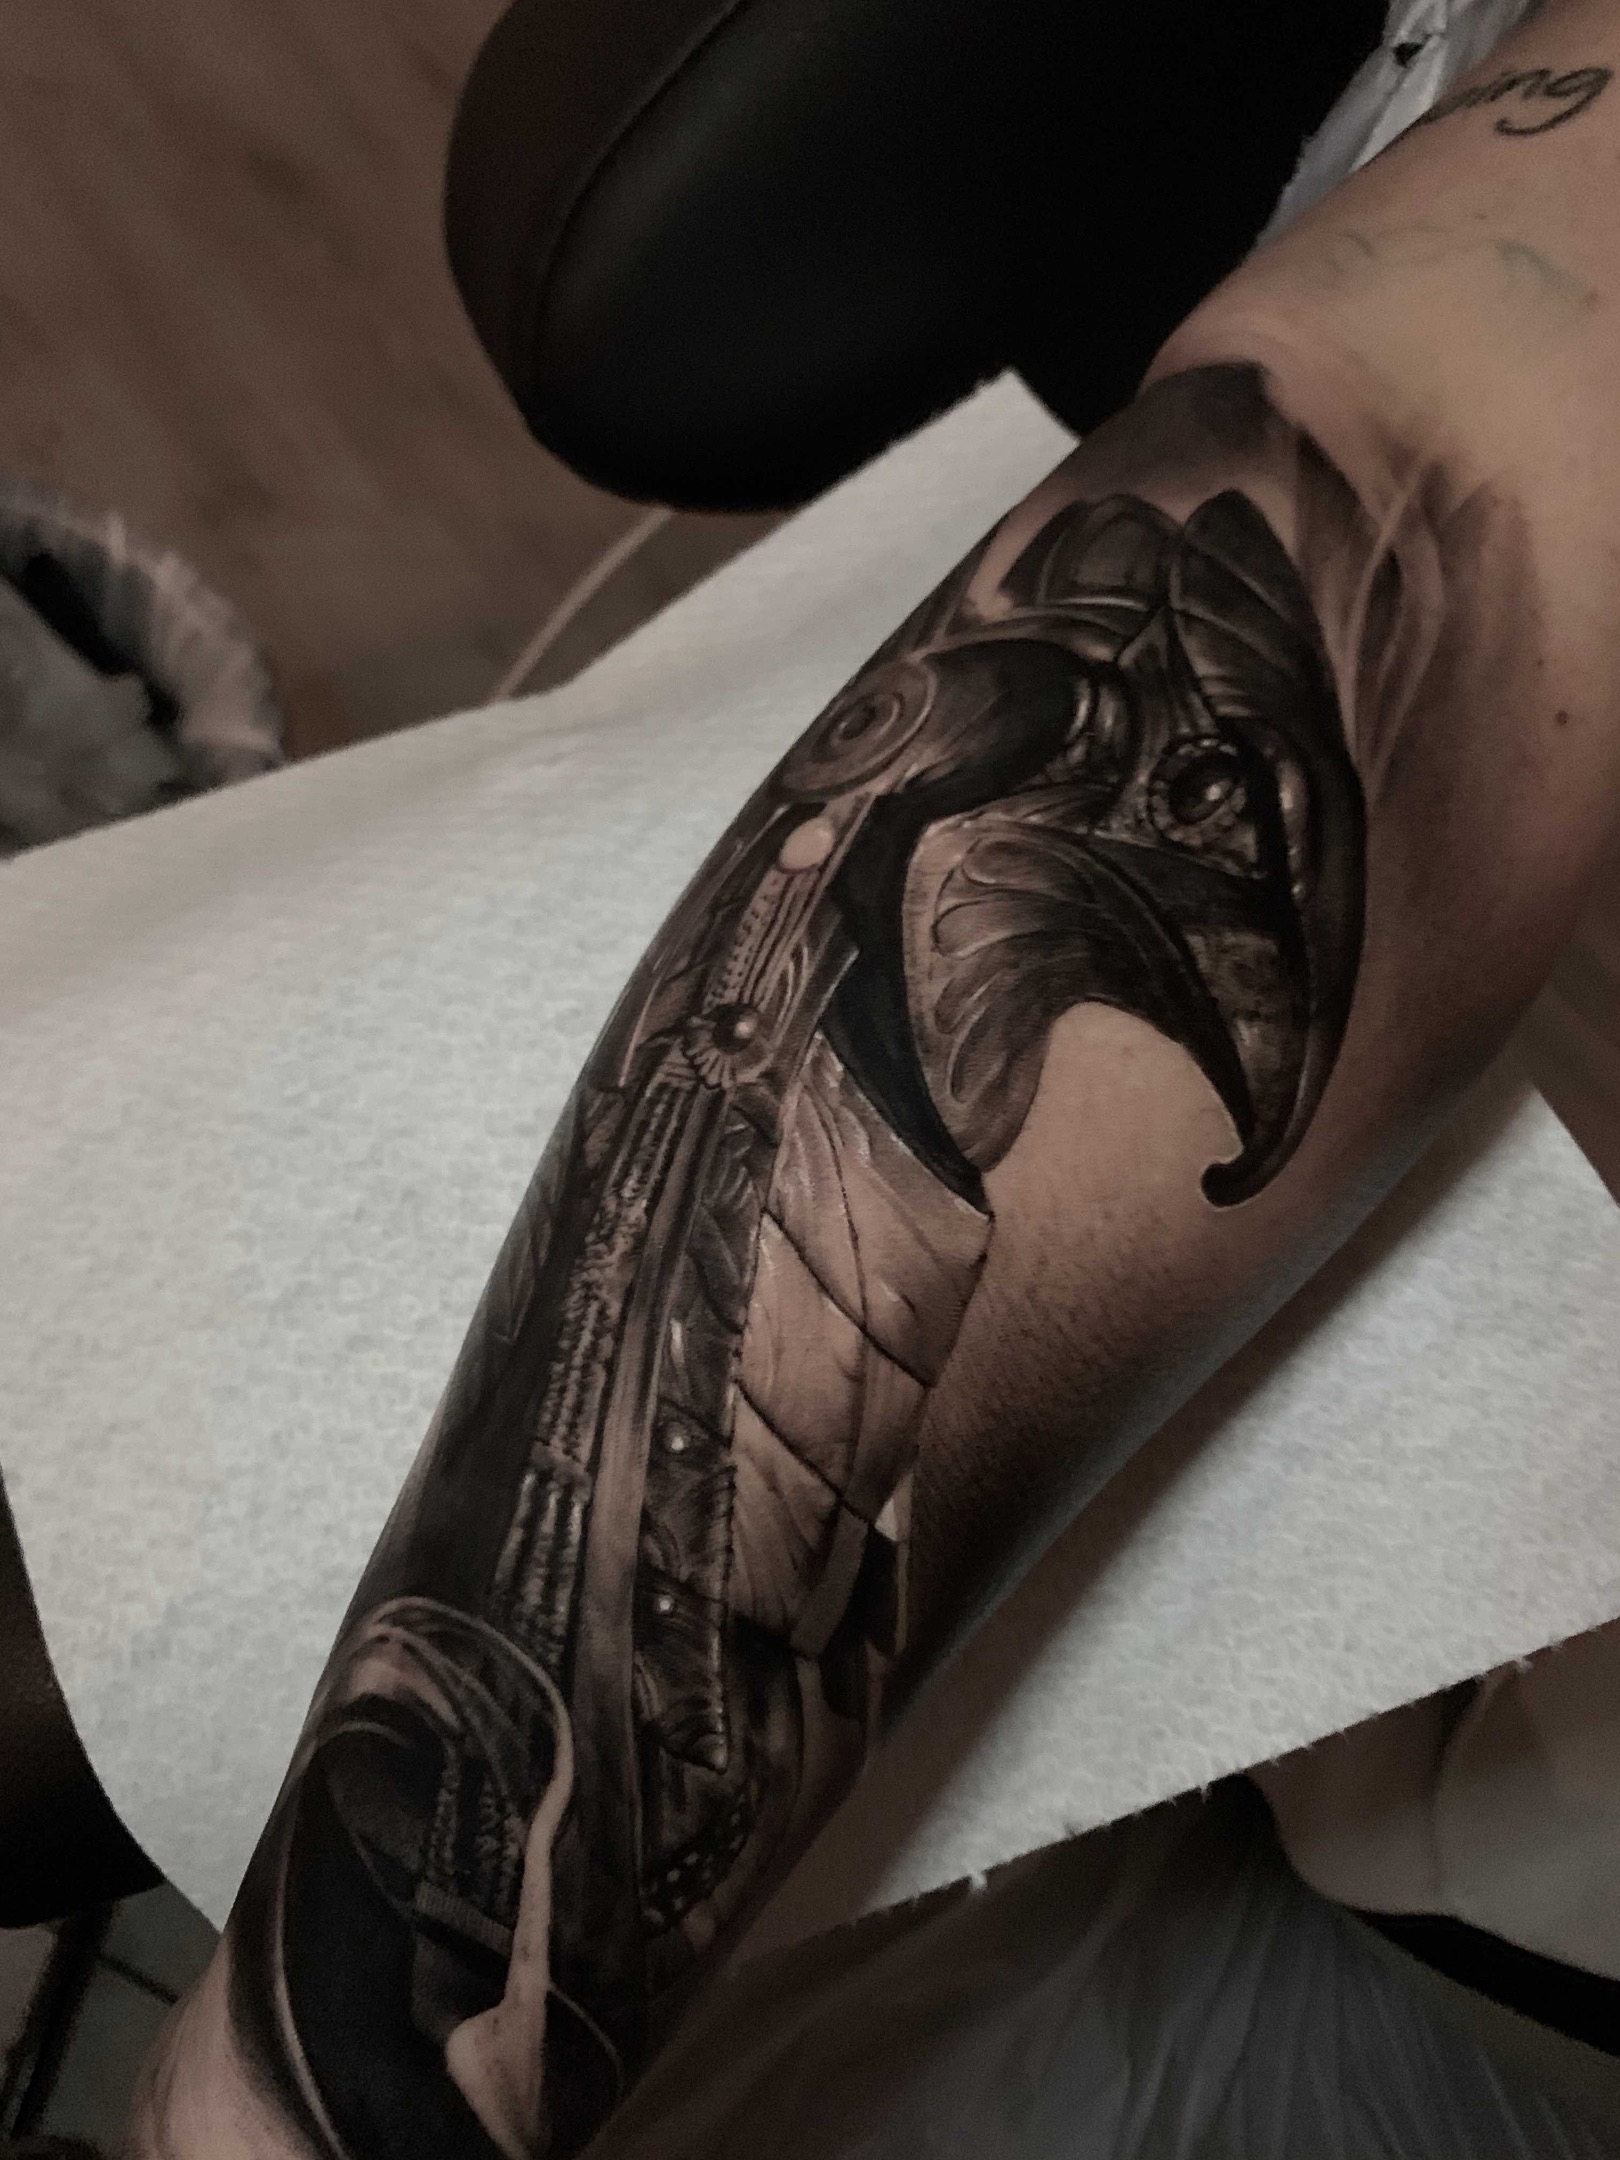 Outstanding Realistic Tattoo Designs by Jose Miguel Duque